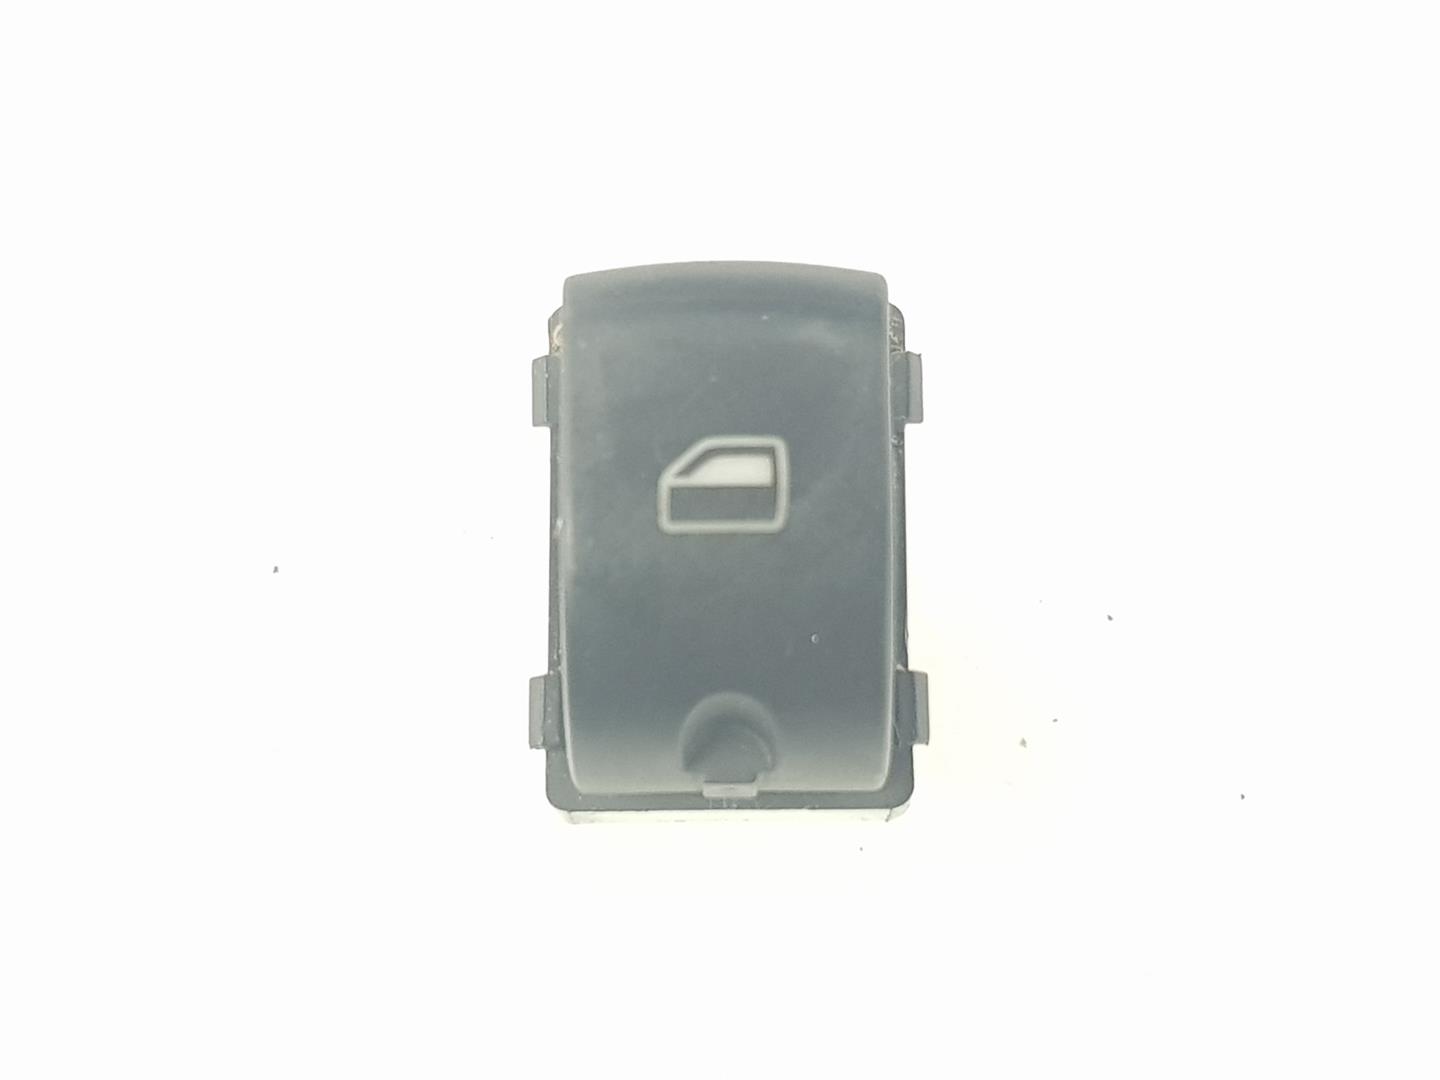 AUDI A3 8P (2003-2013) Front Right Door Window Switch 4F0959855A, 4F0959855A 19799413